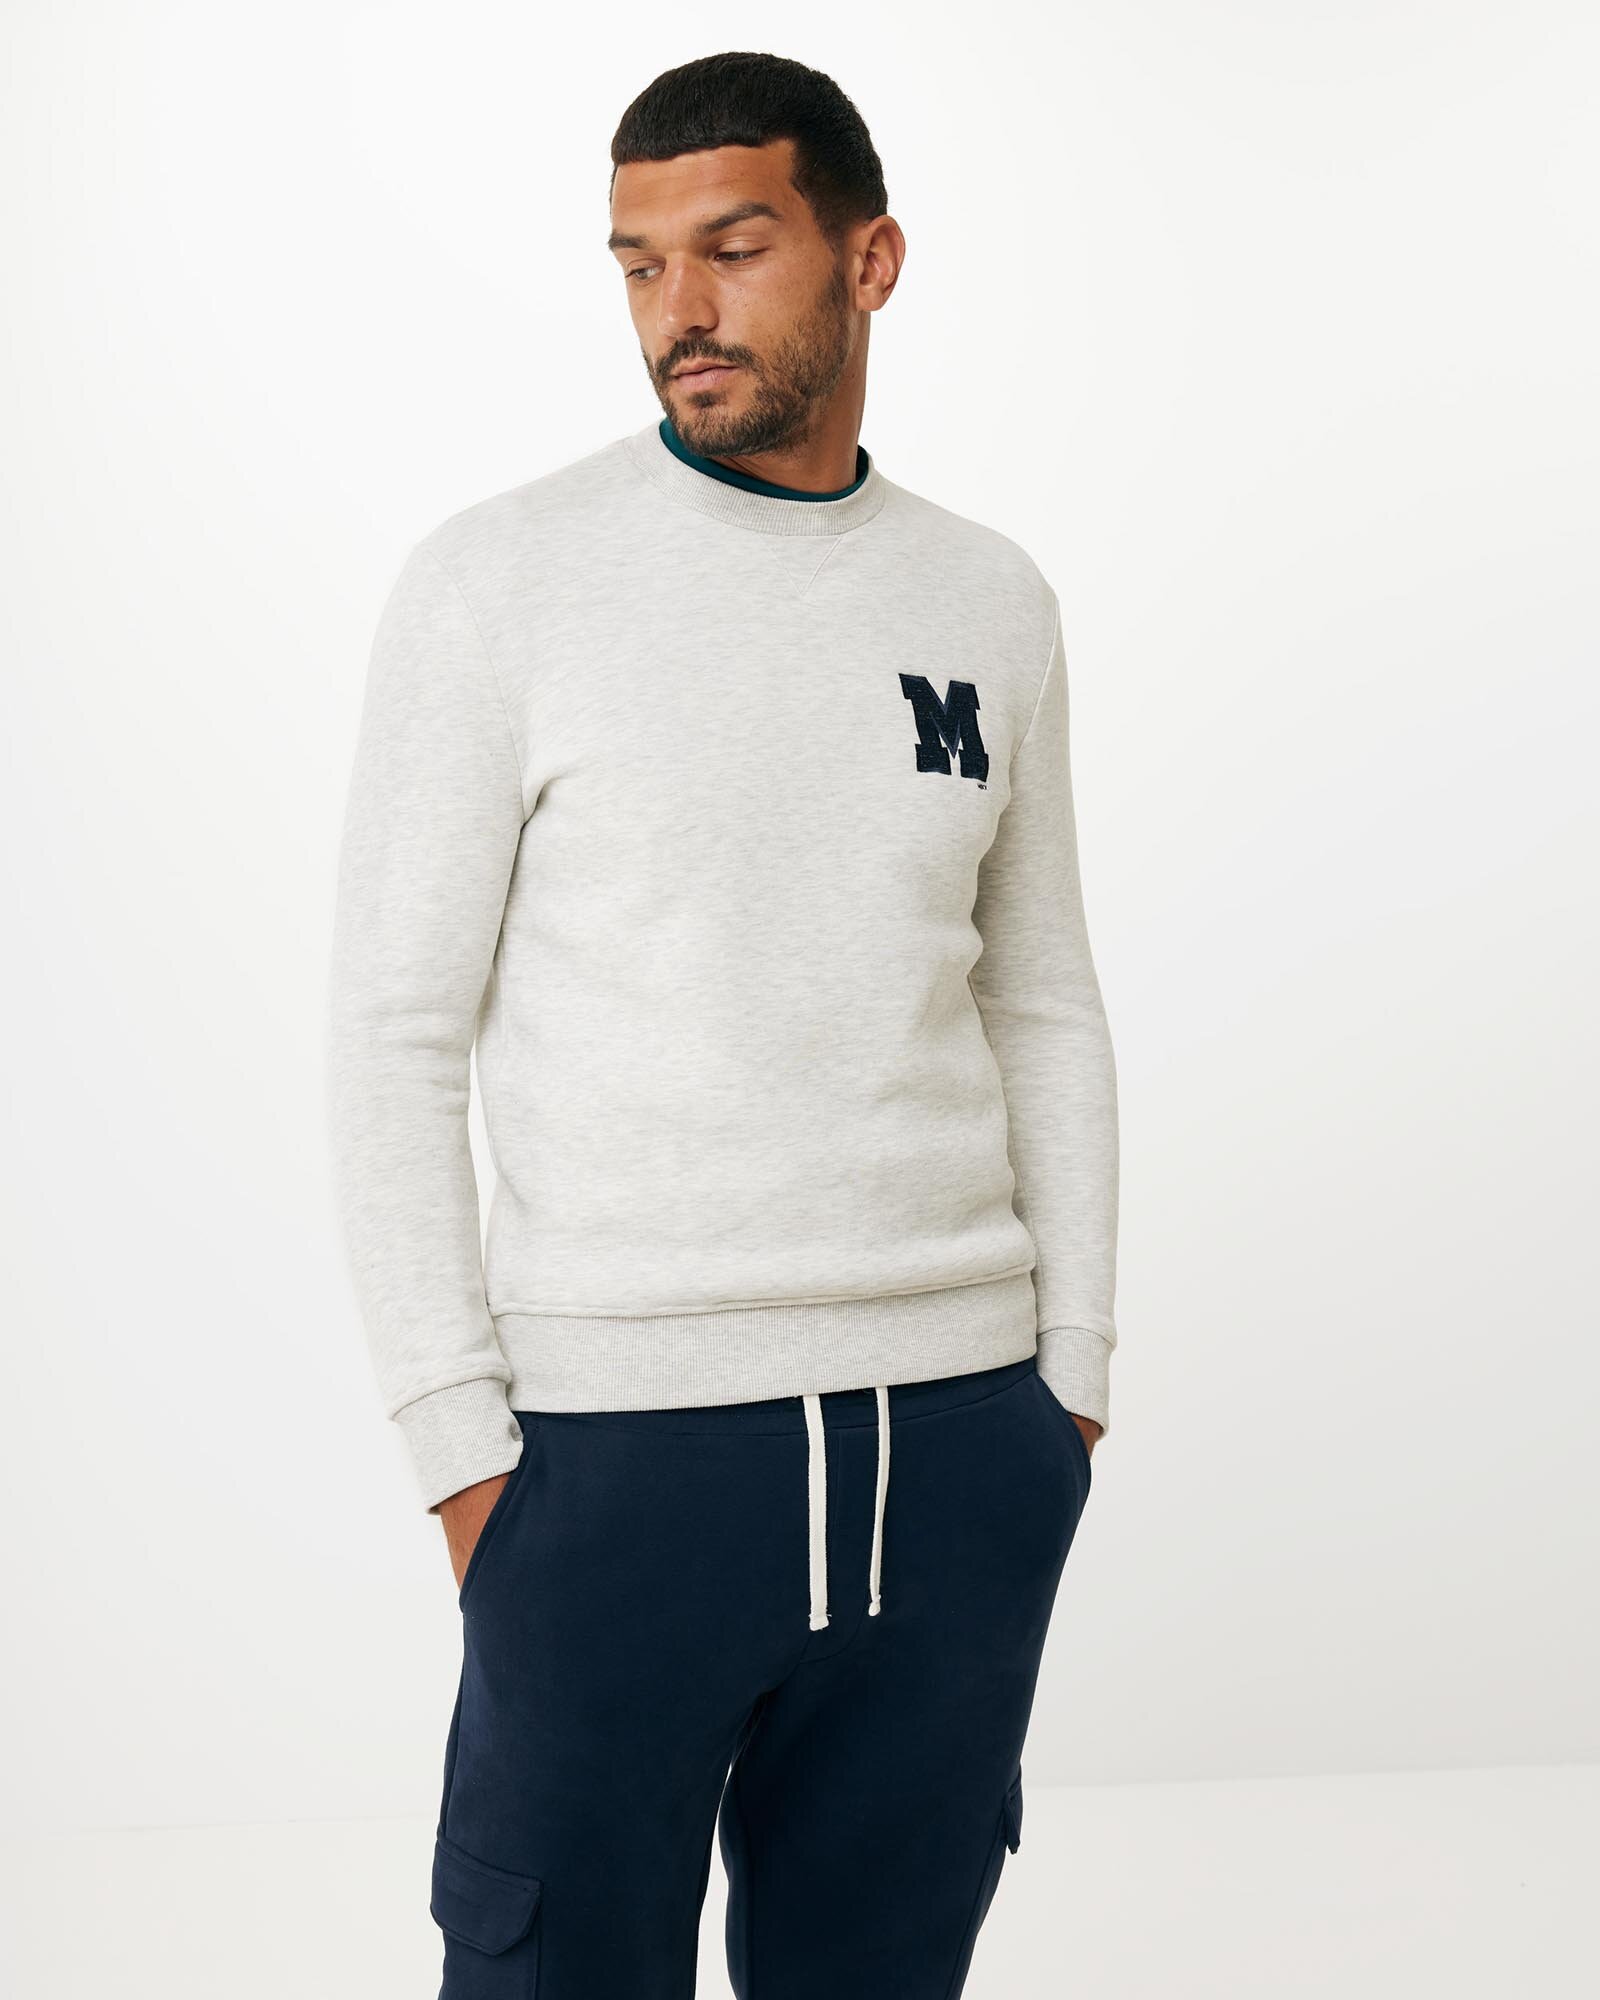 Mexx Crew Neck Sweatshirt With Embroidery Mannen - Off White Melee - Maat S